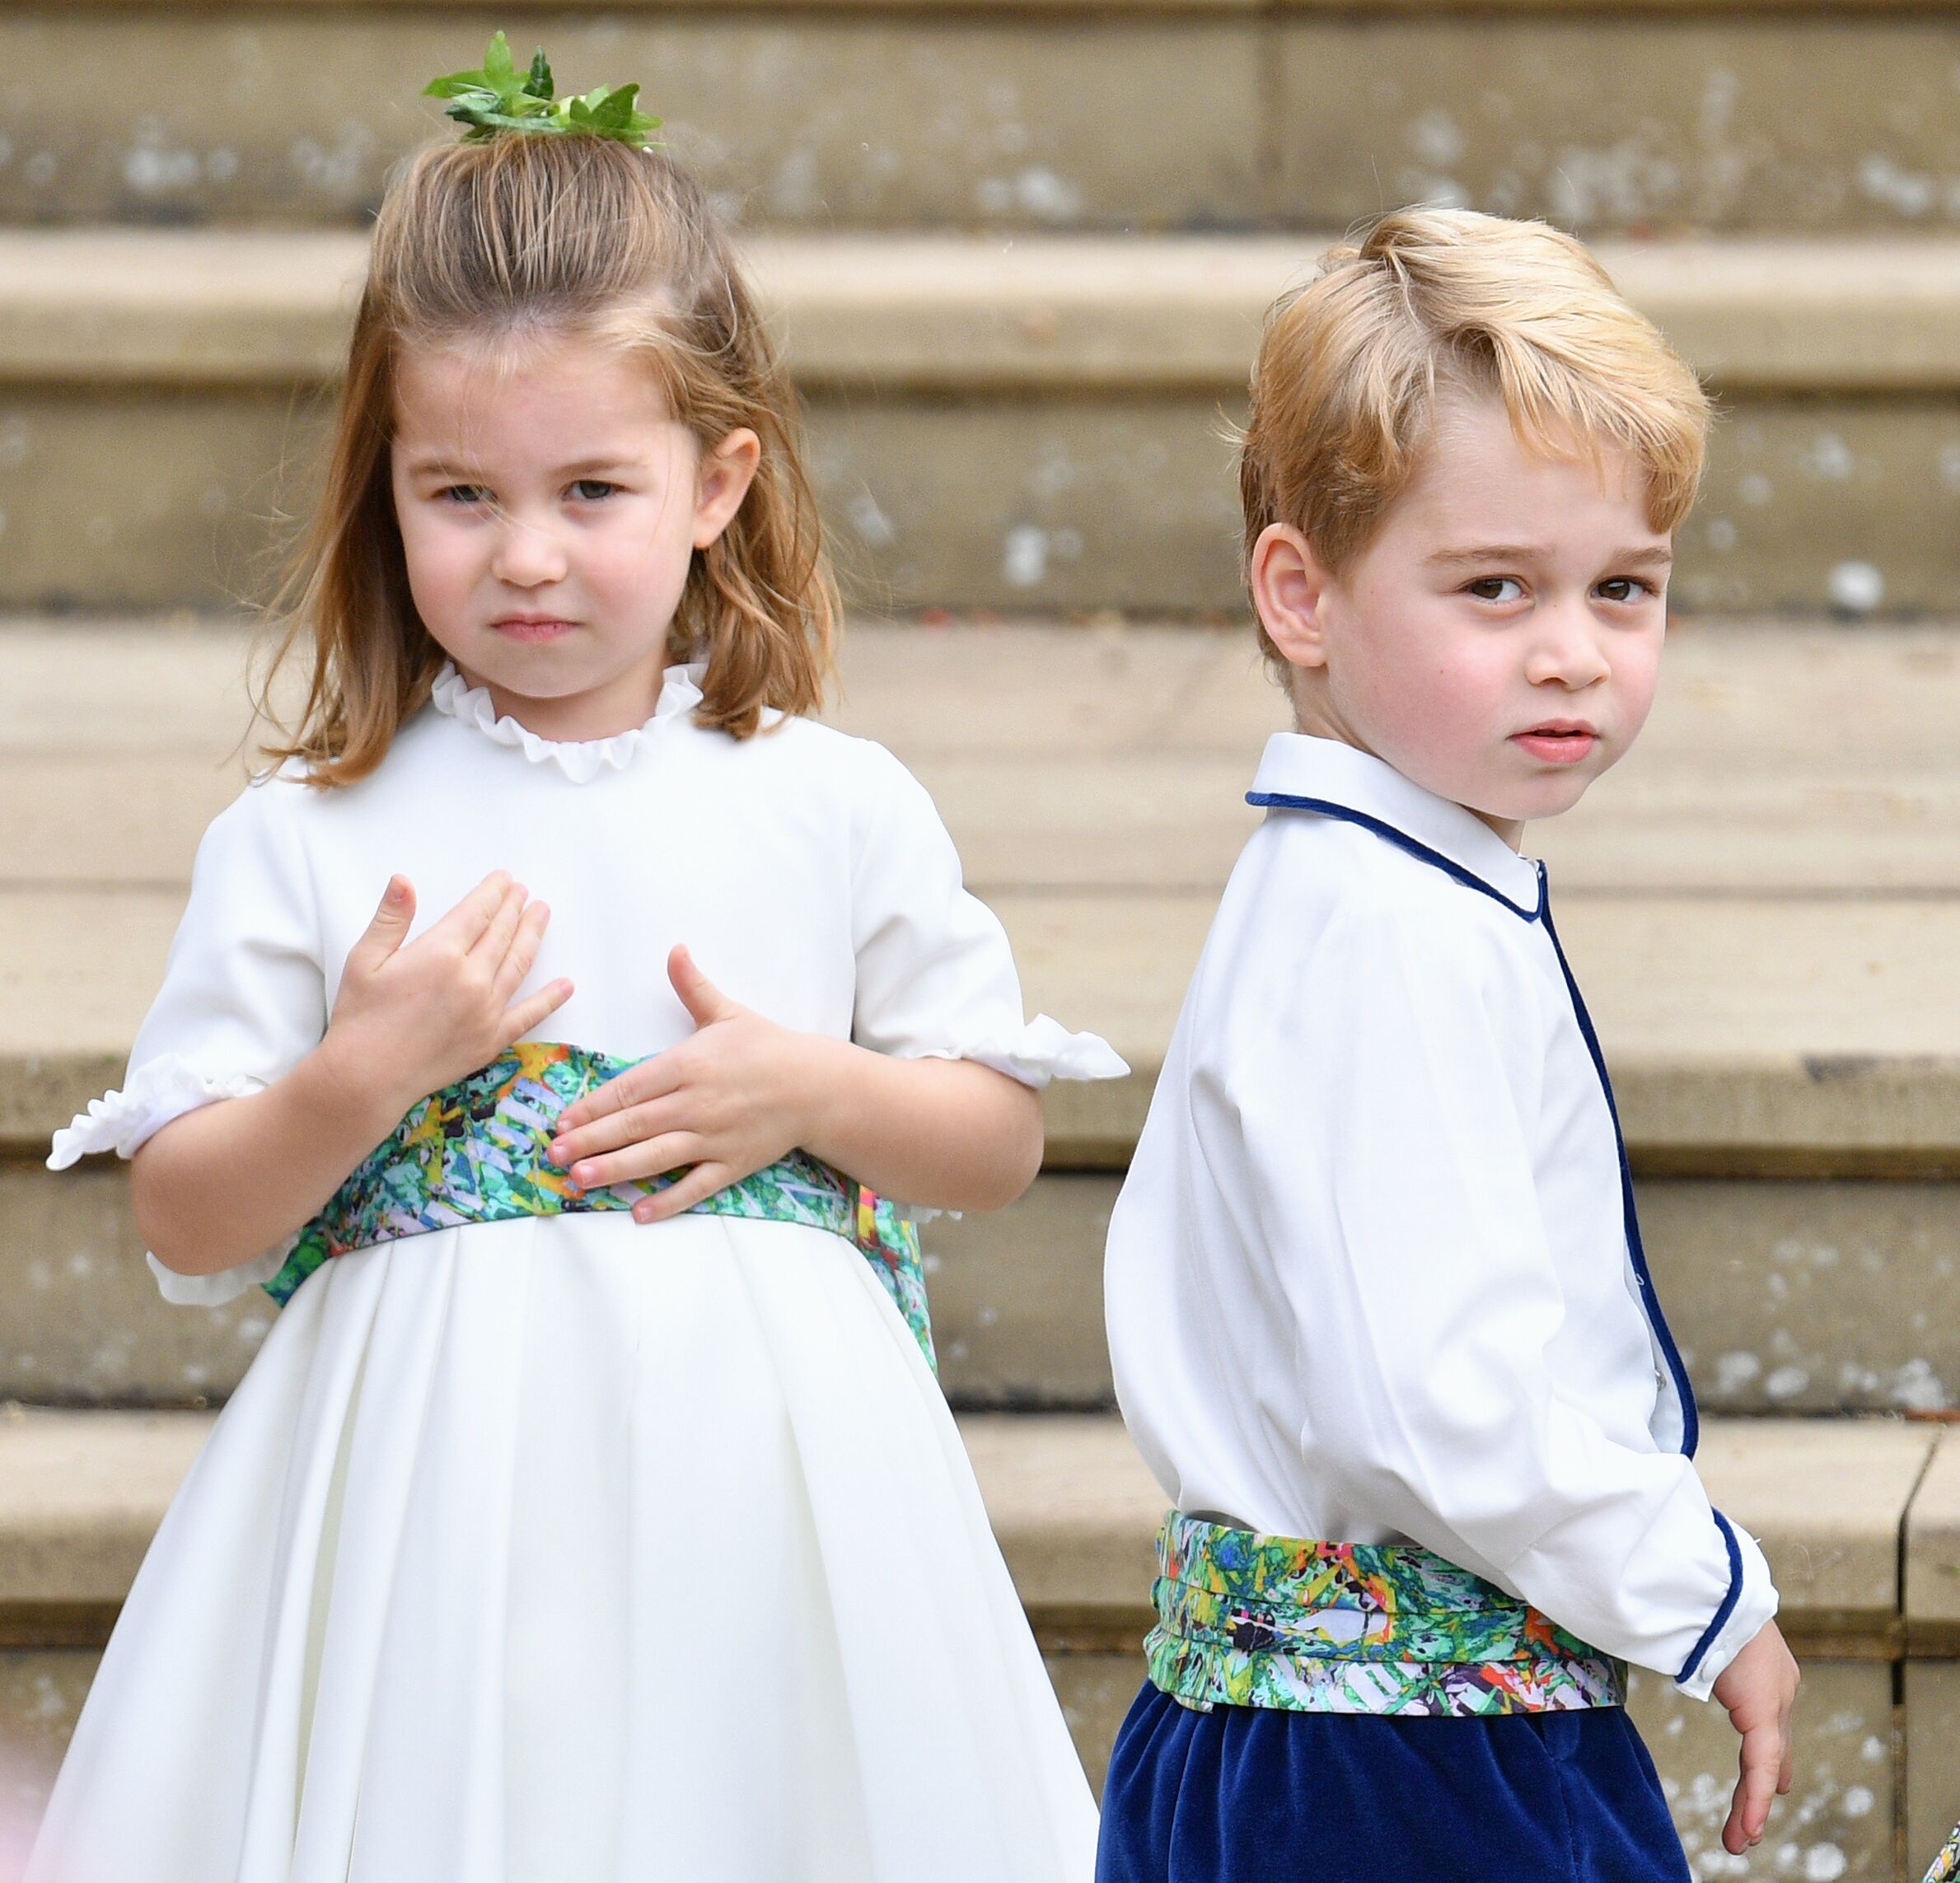 Princess Charlotte of Cambridge and Prince George of Cambridge attend the wedding of Princess Eugenie of York and Jack Brooksbank at St George's Chapel in Windsor, England | Photo: Getty Images